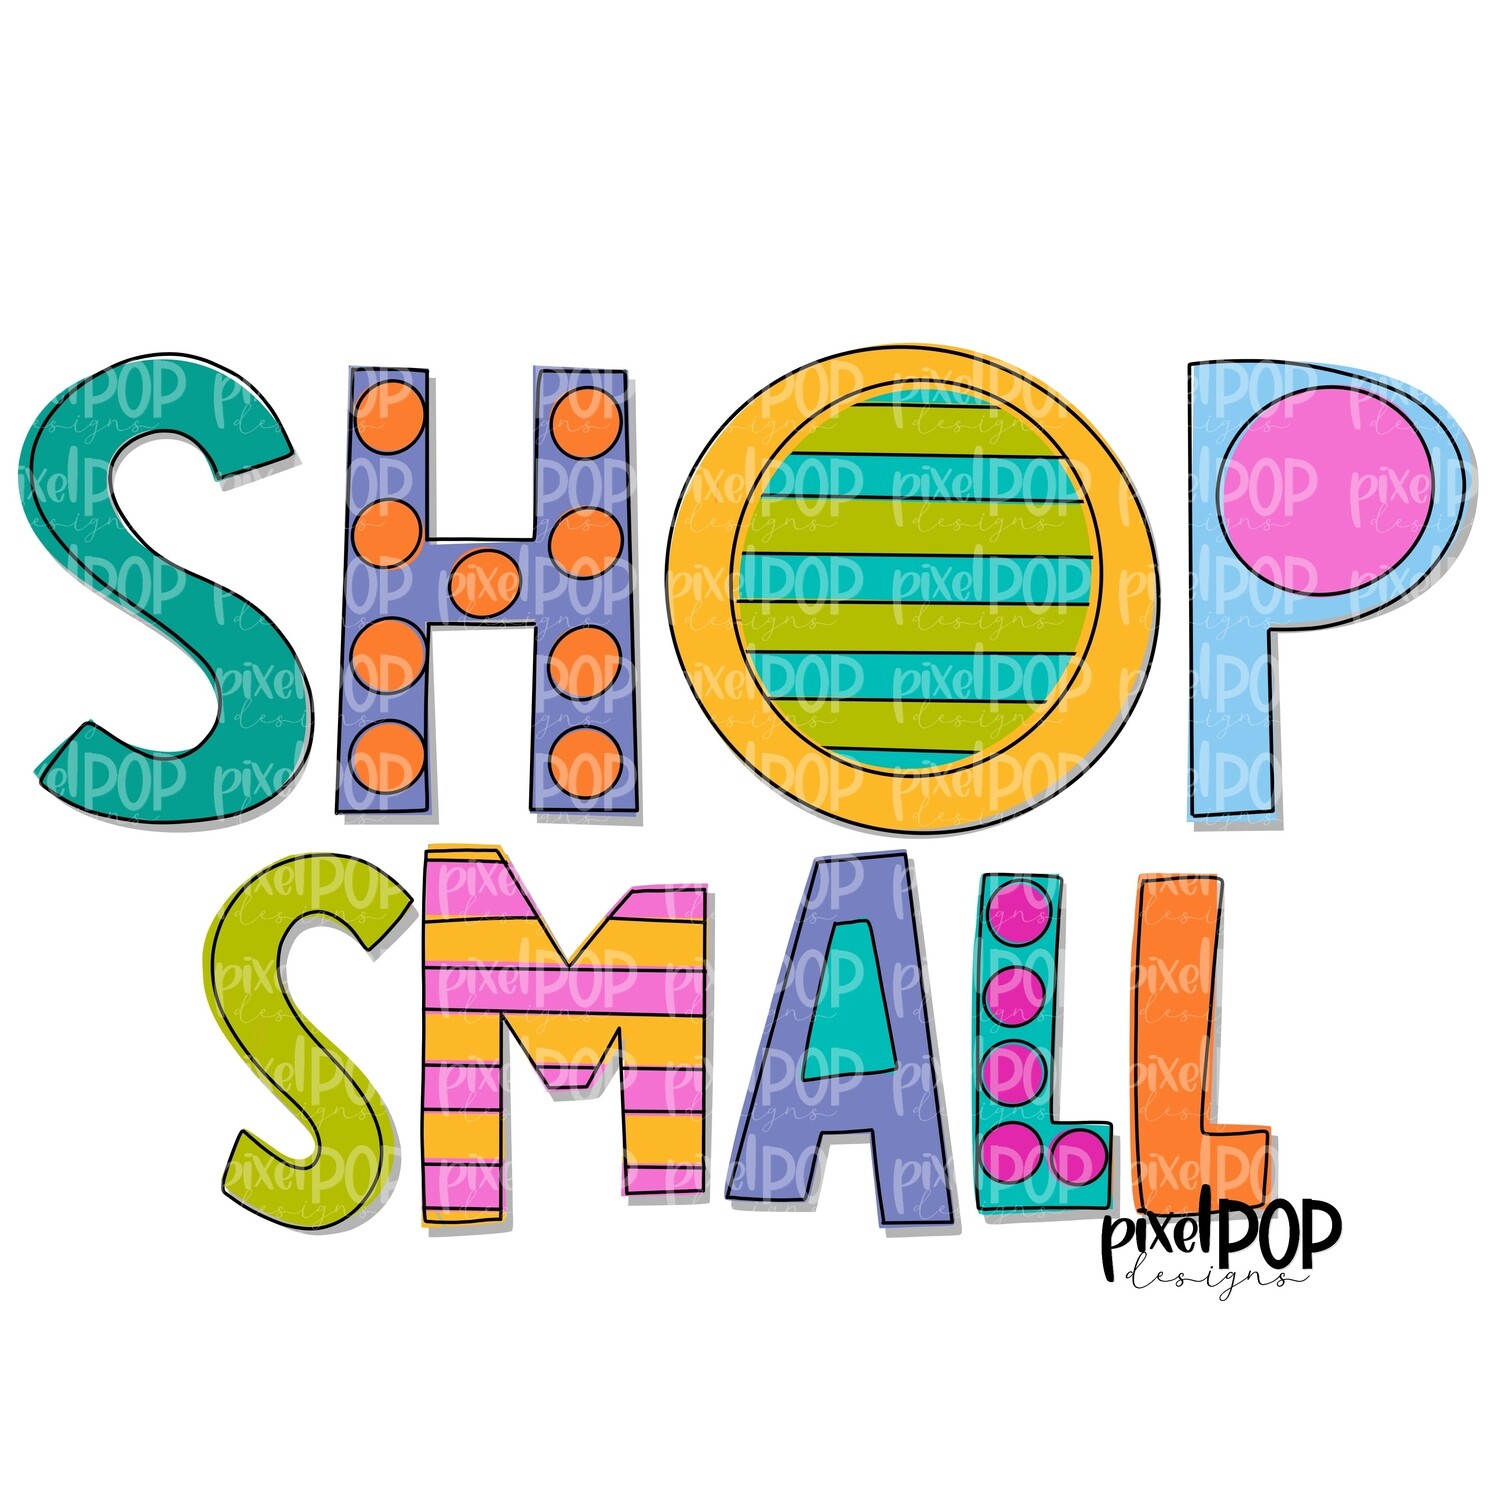 Shop Small Bright PNG | Business Clip | Small Business Marketing Image | Small Business Sticker Art | Business Art